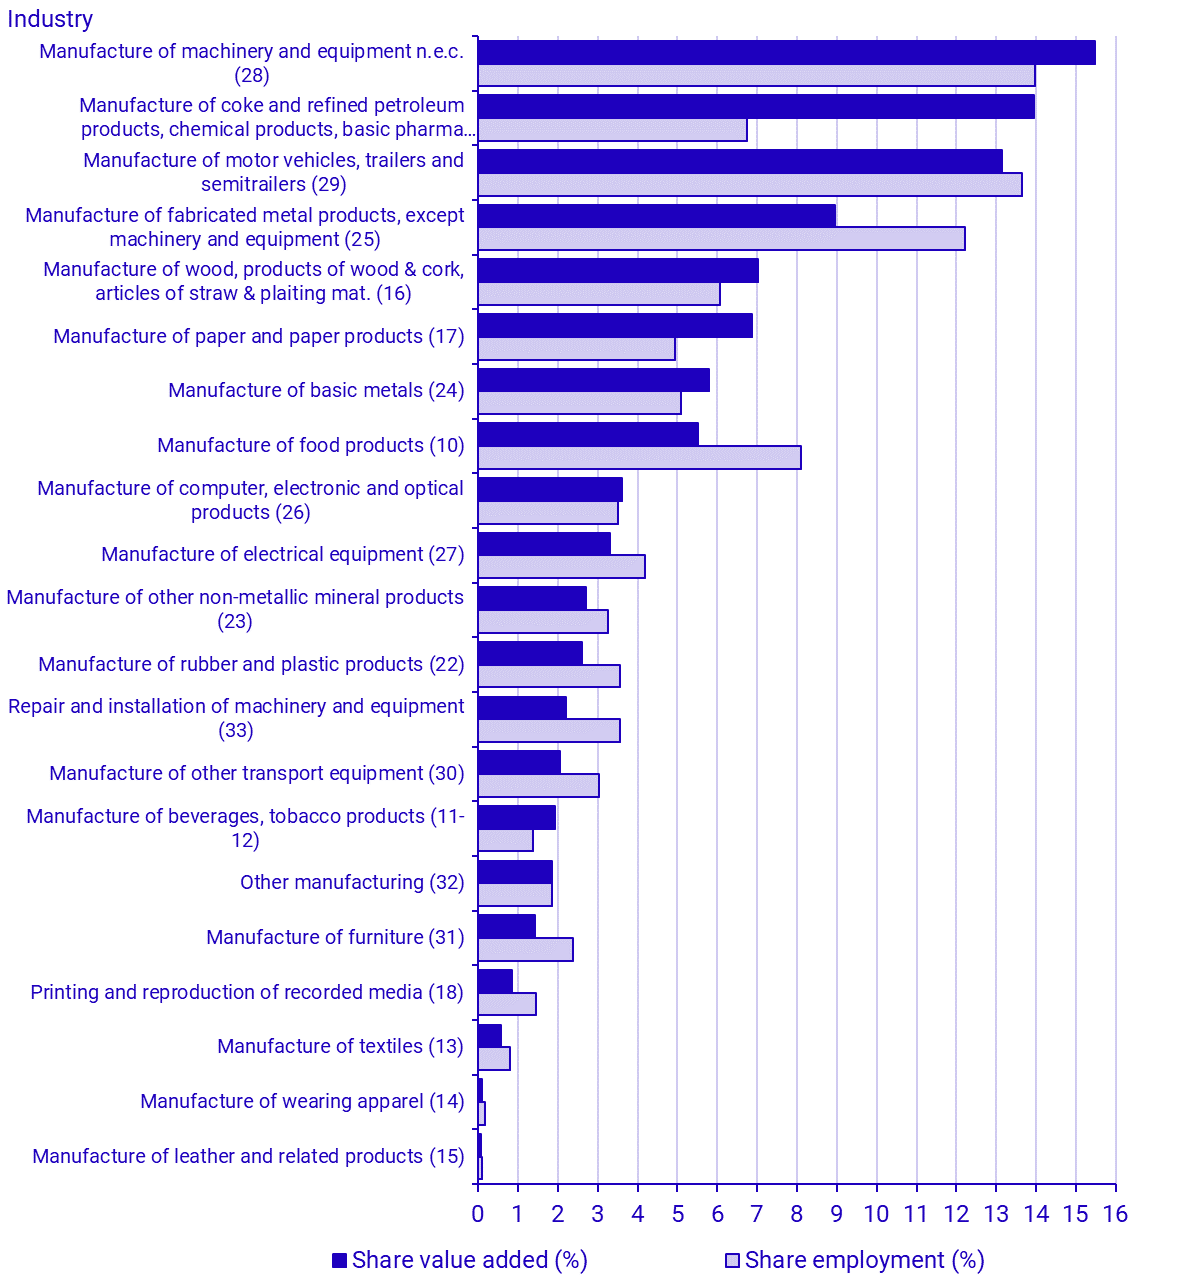 Share of total manufacturing value added and employment by industry (NACE sections) 2020